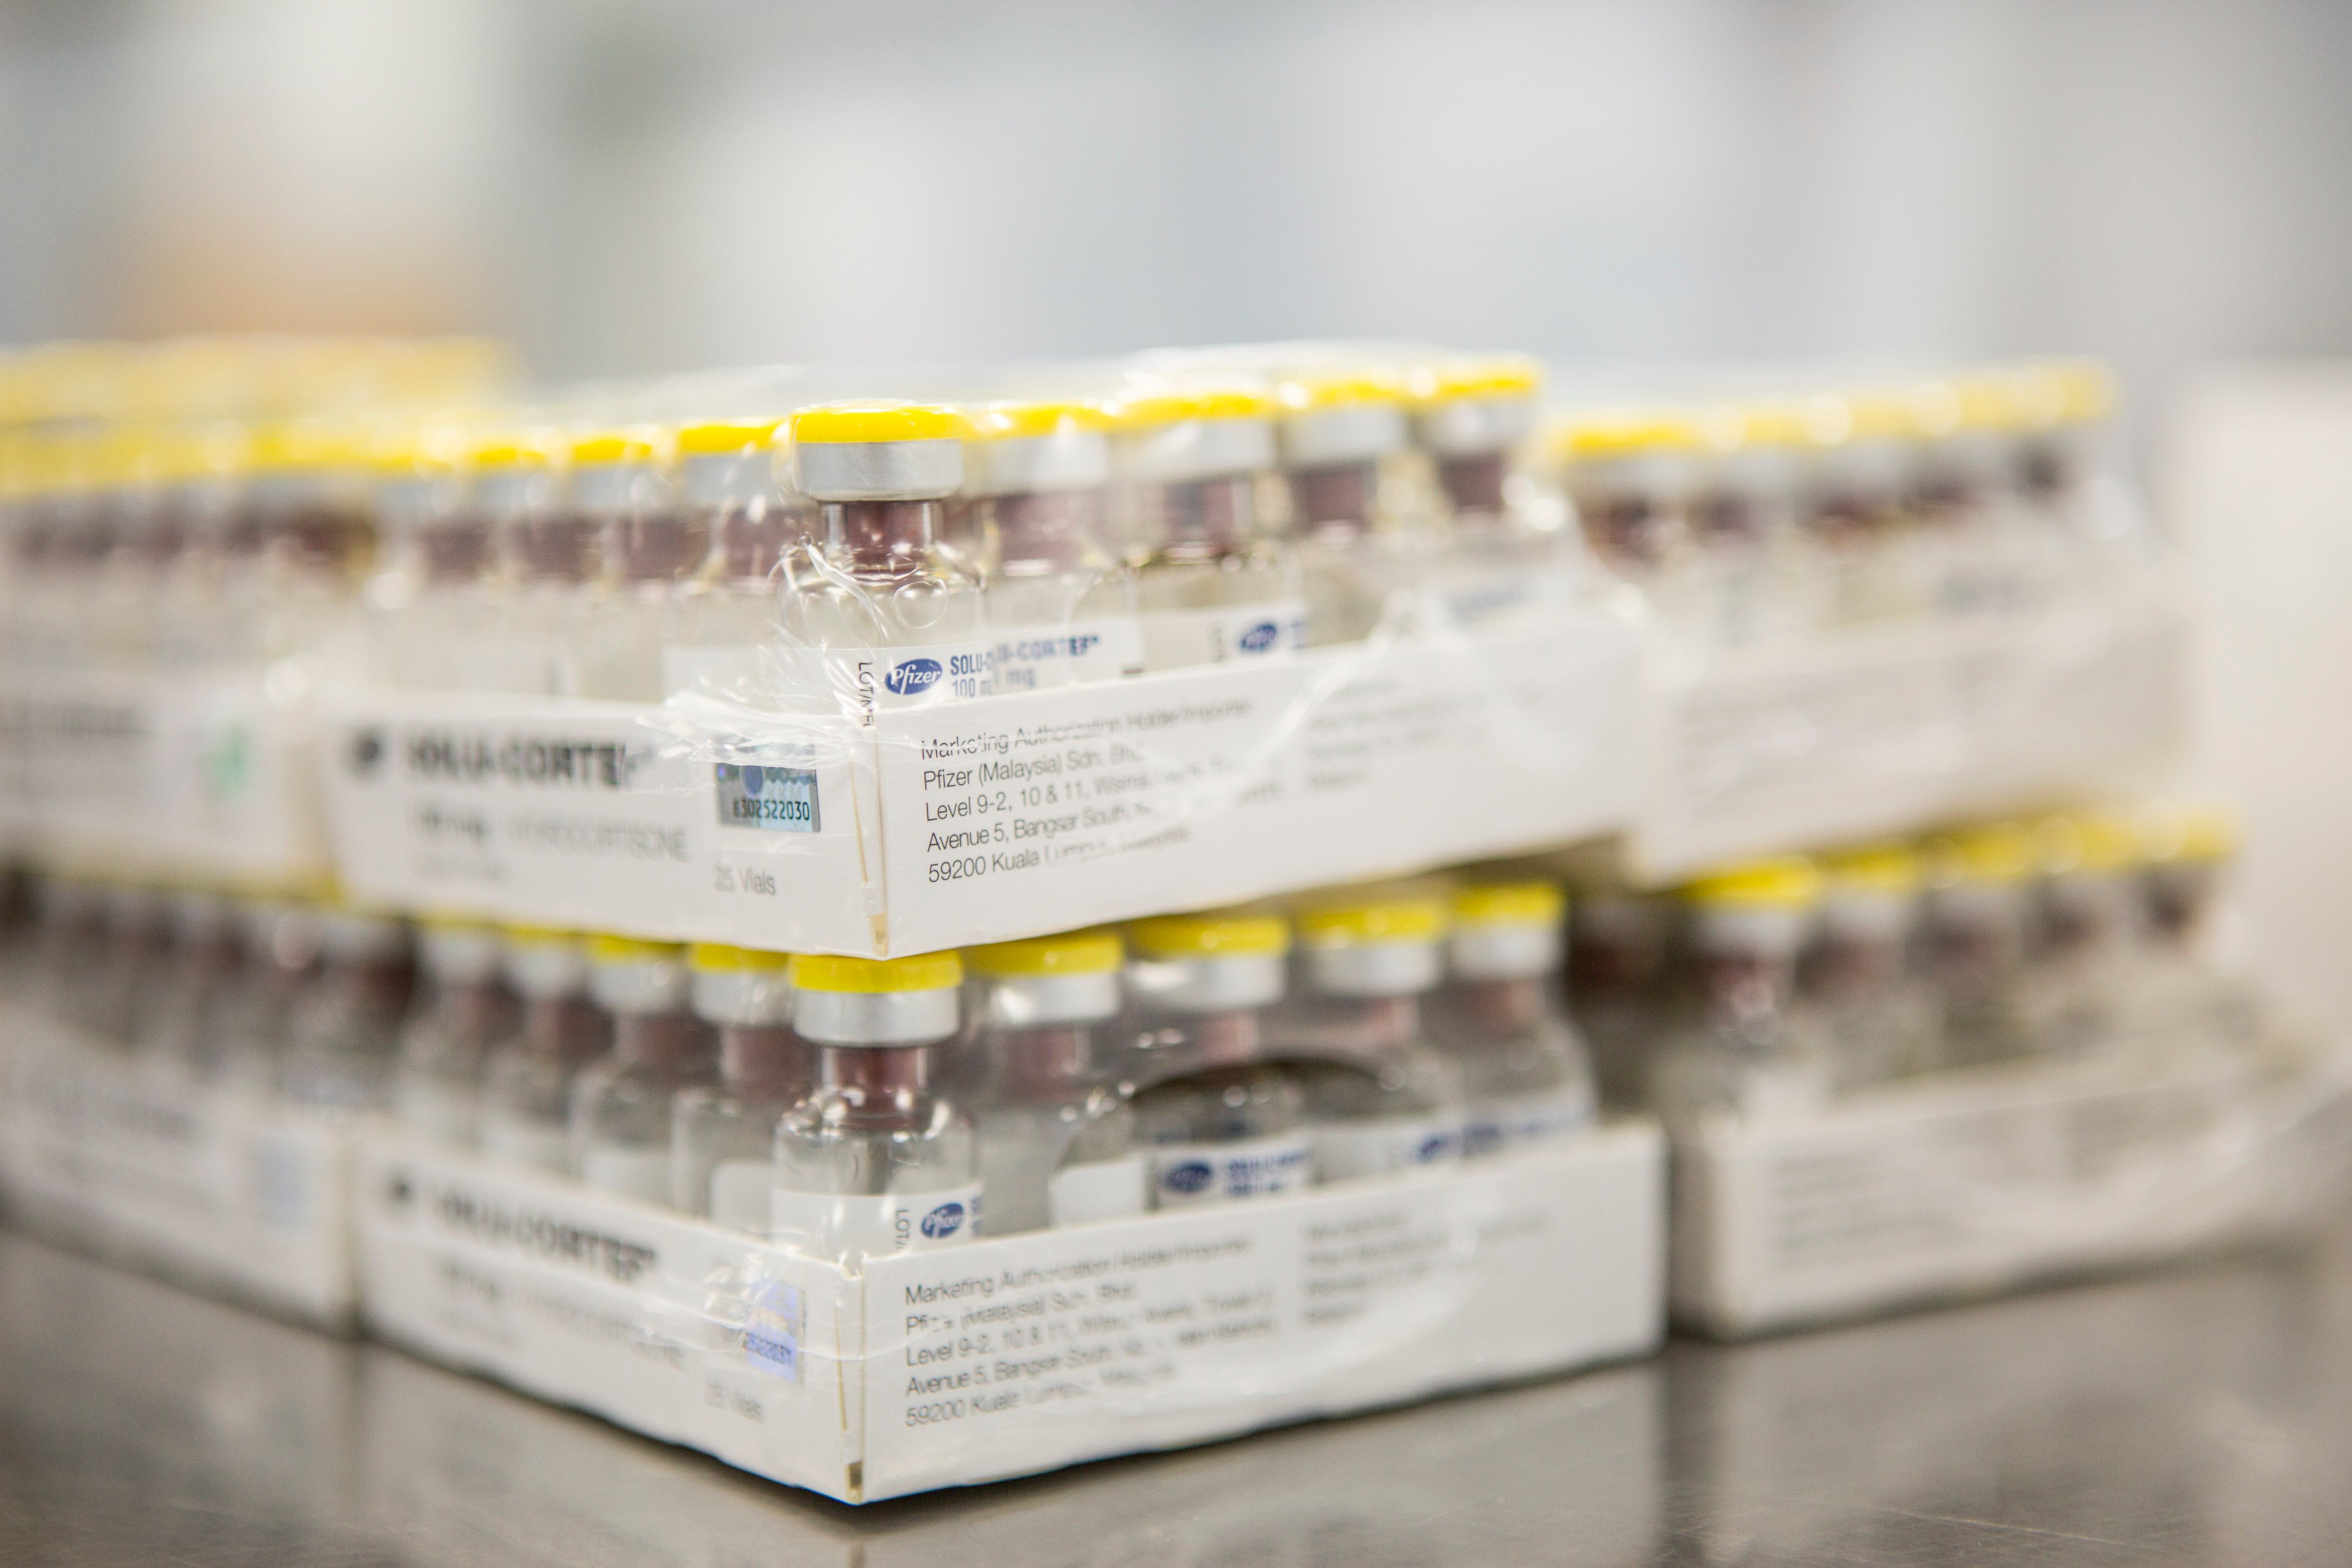 Zuellig Pharma Thailand collaborates with the department of disease control (ddc) to provide nationwide distribution services of 1.5million doses of pfizer-biontech COVID -19 mrna vaccines